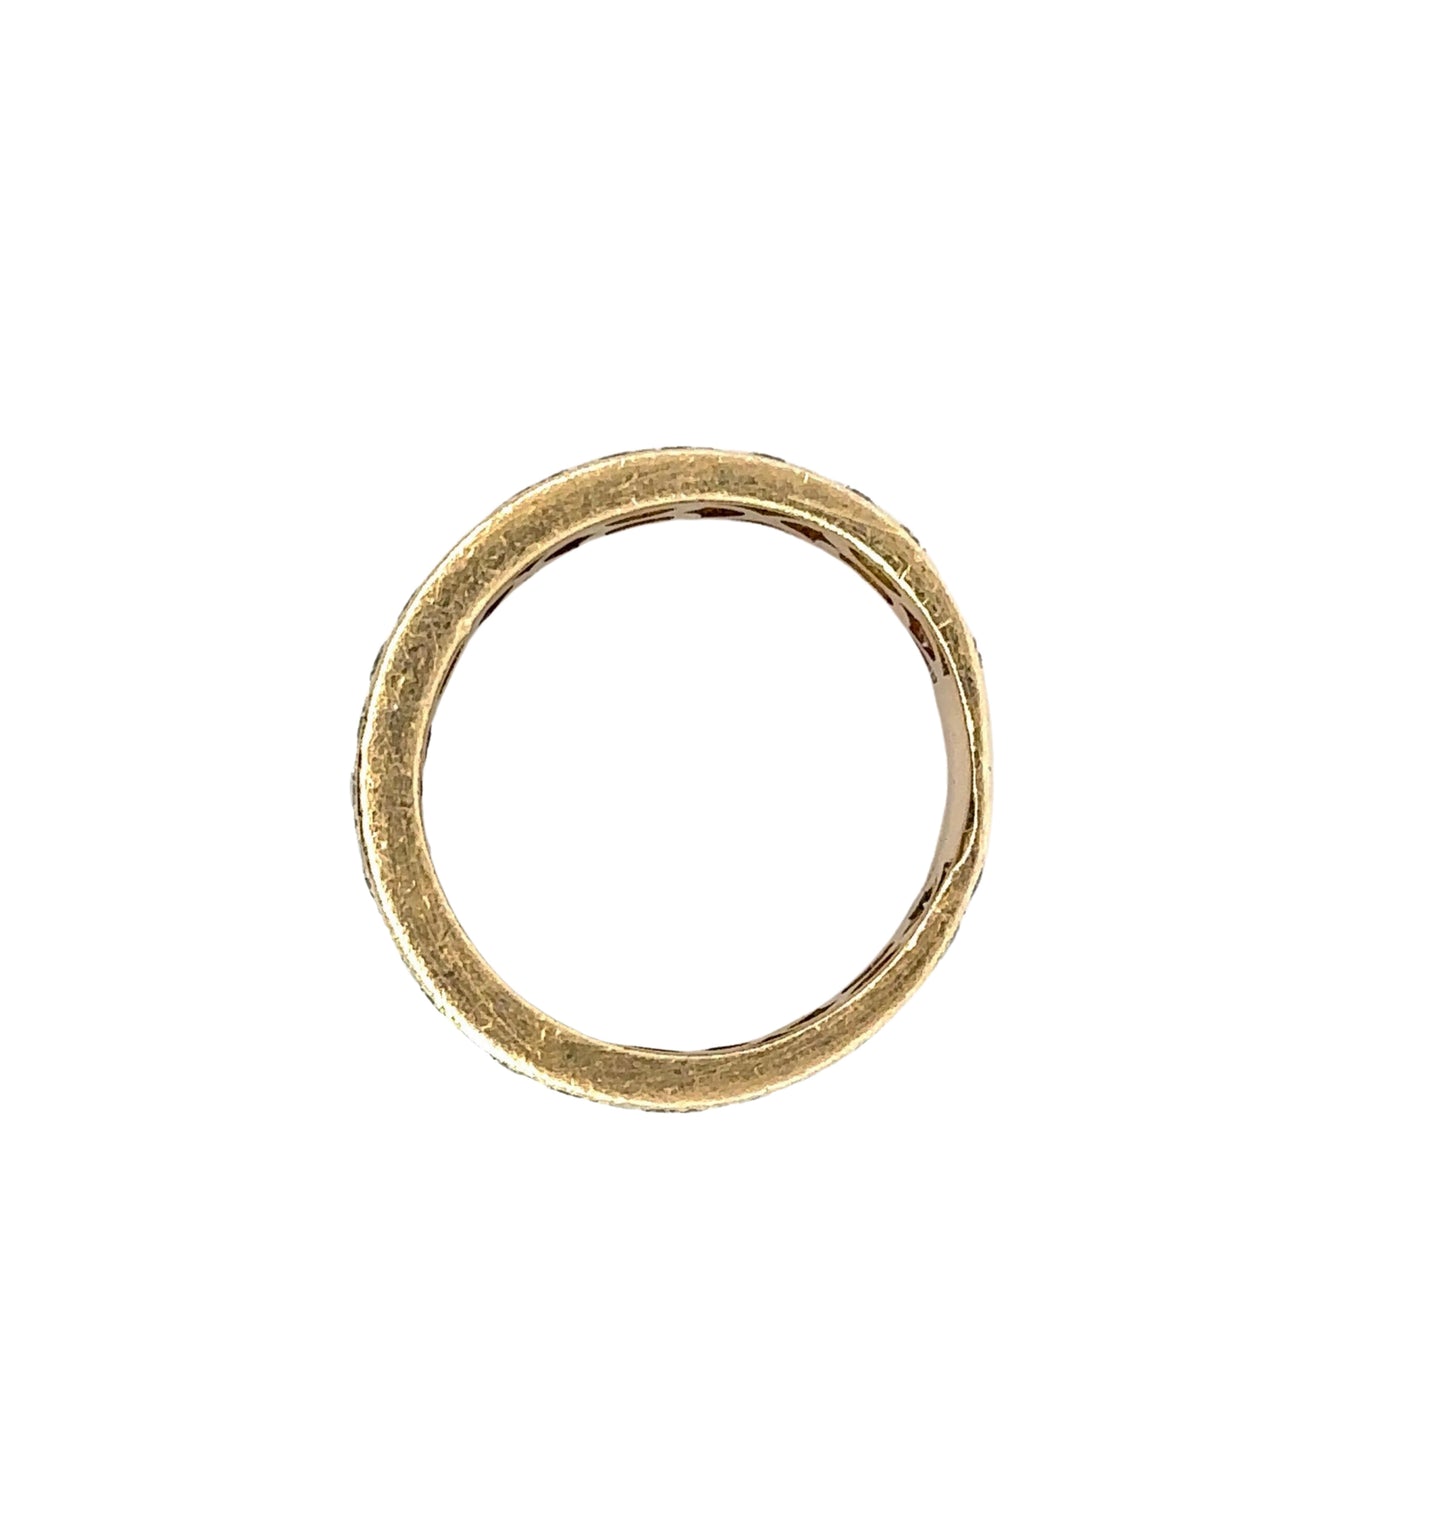 top of yellow gold ring with obvious scratches (can be polished once purchased)